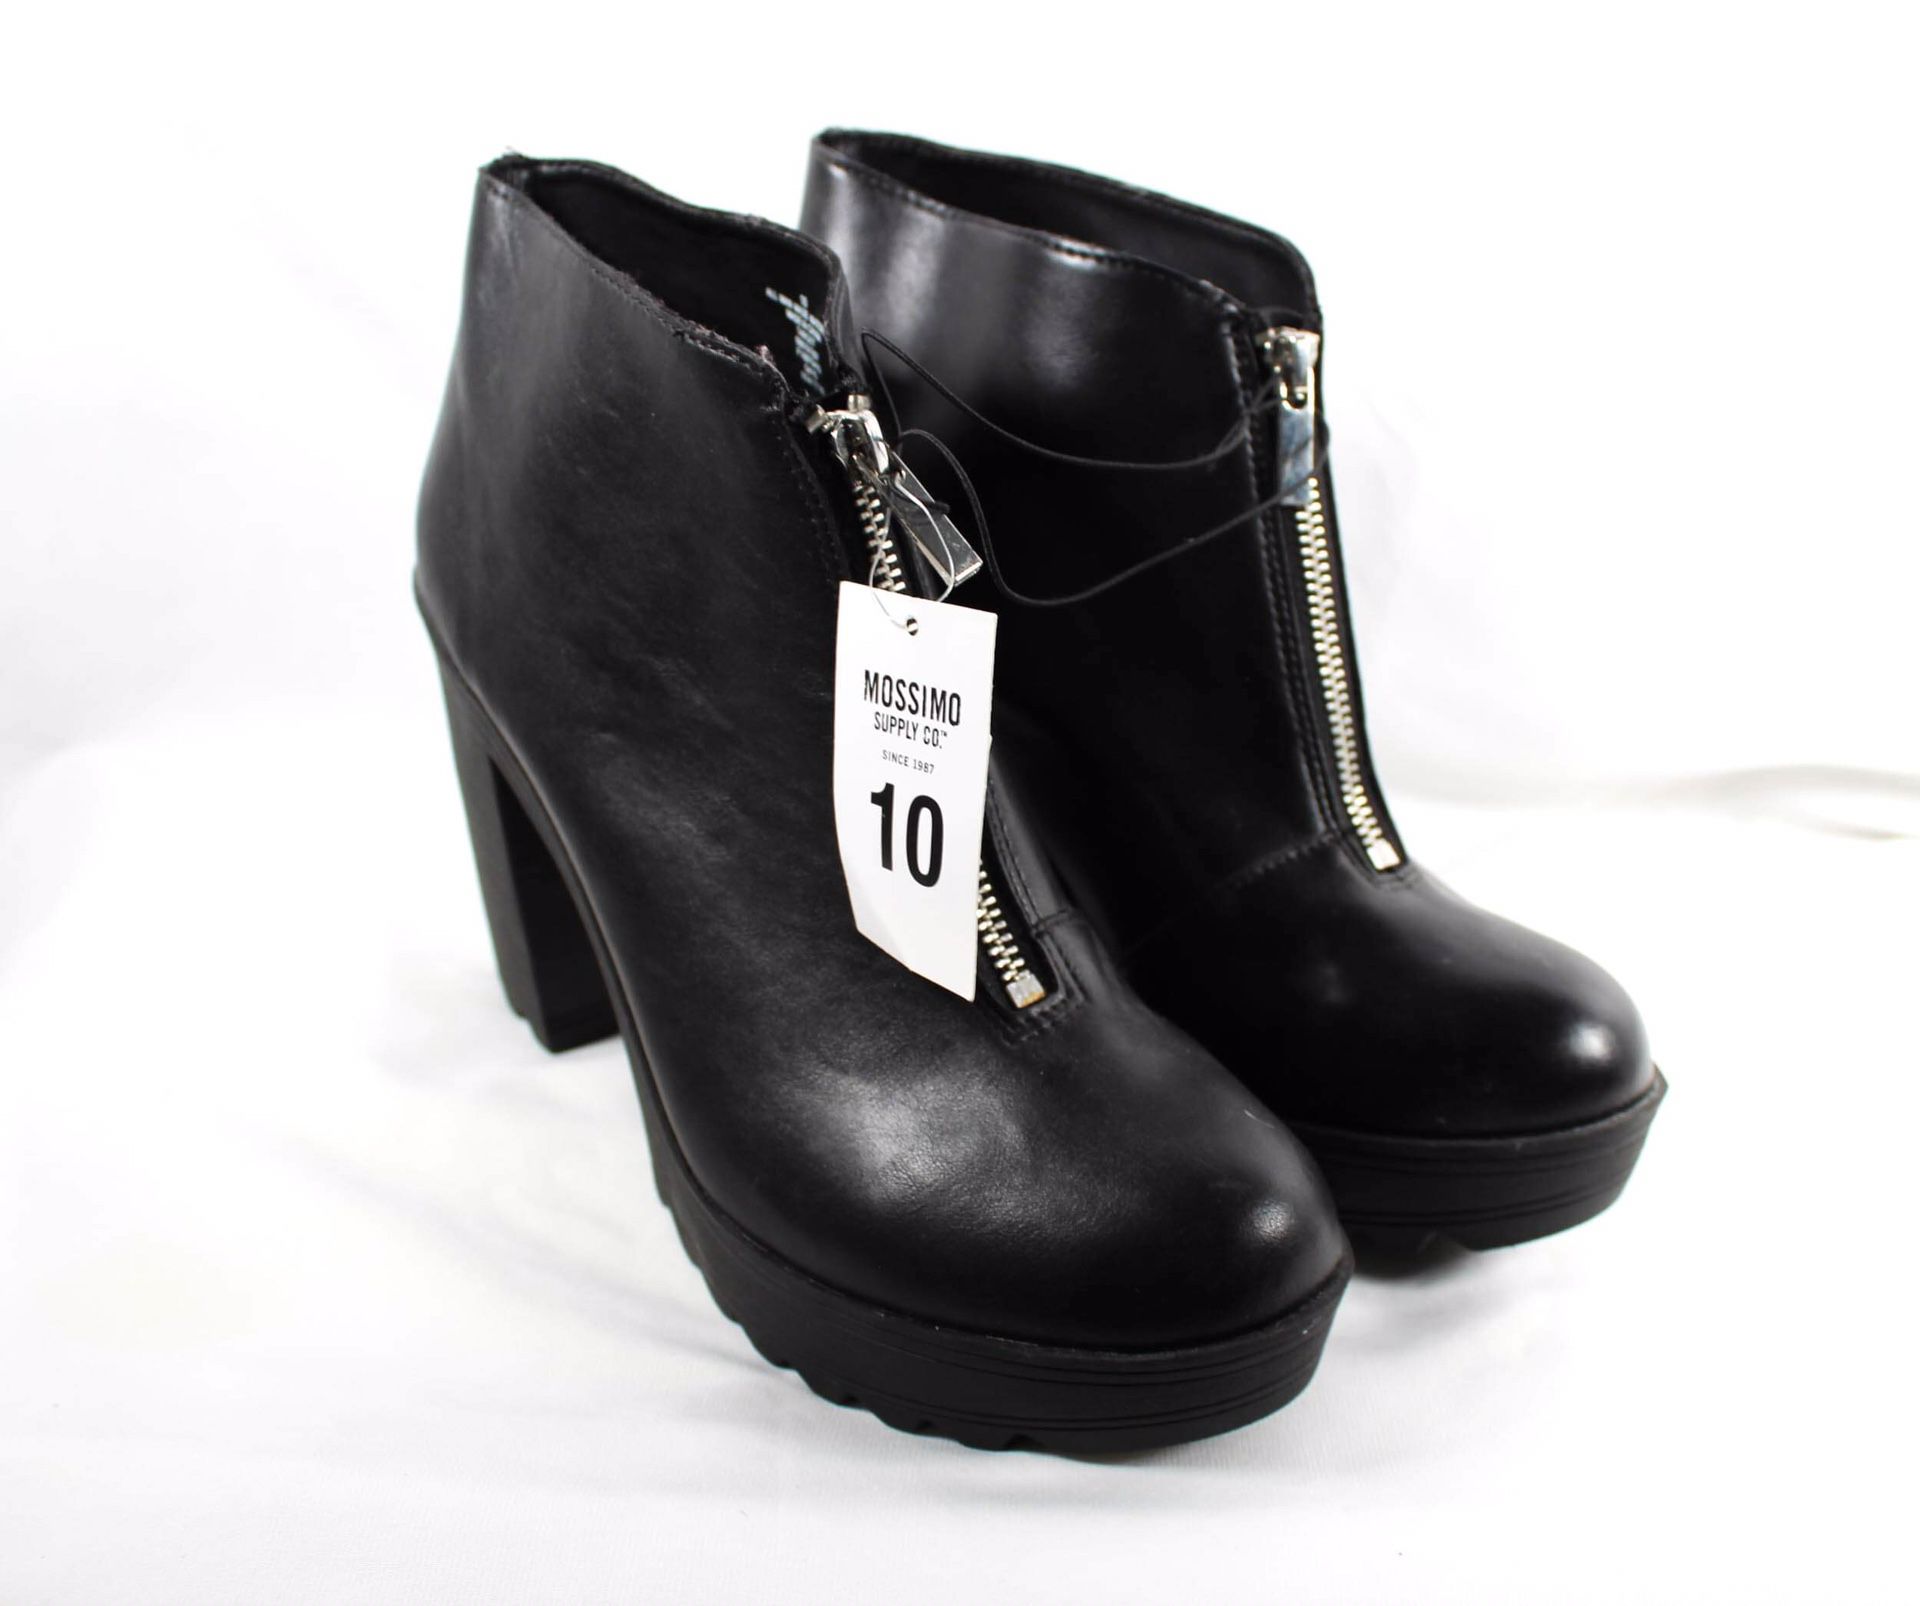 90s Inspired Grunge Goth Girl Faux Leather Edgy Platform Booties With Front Zipper 